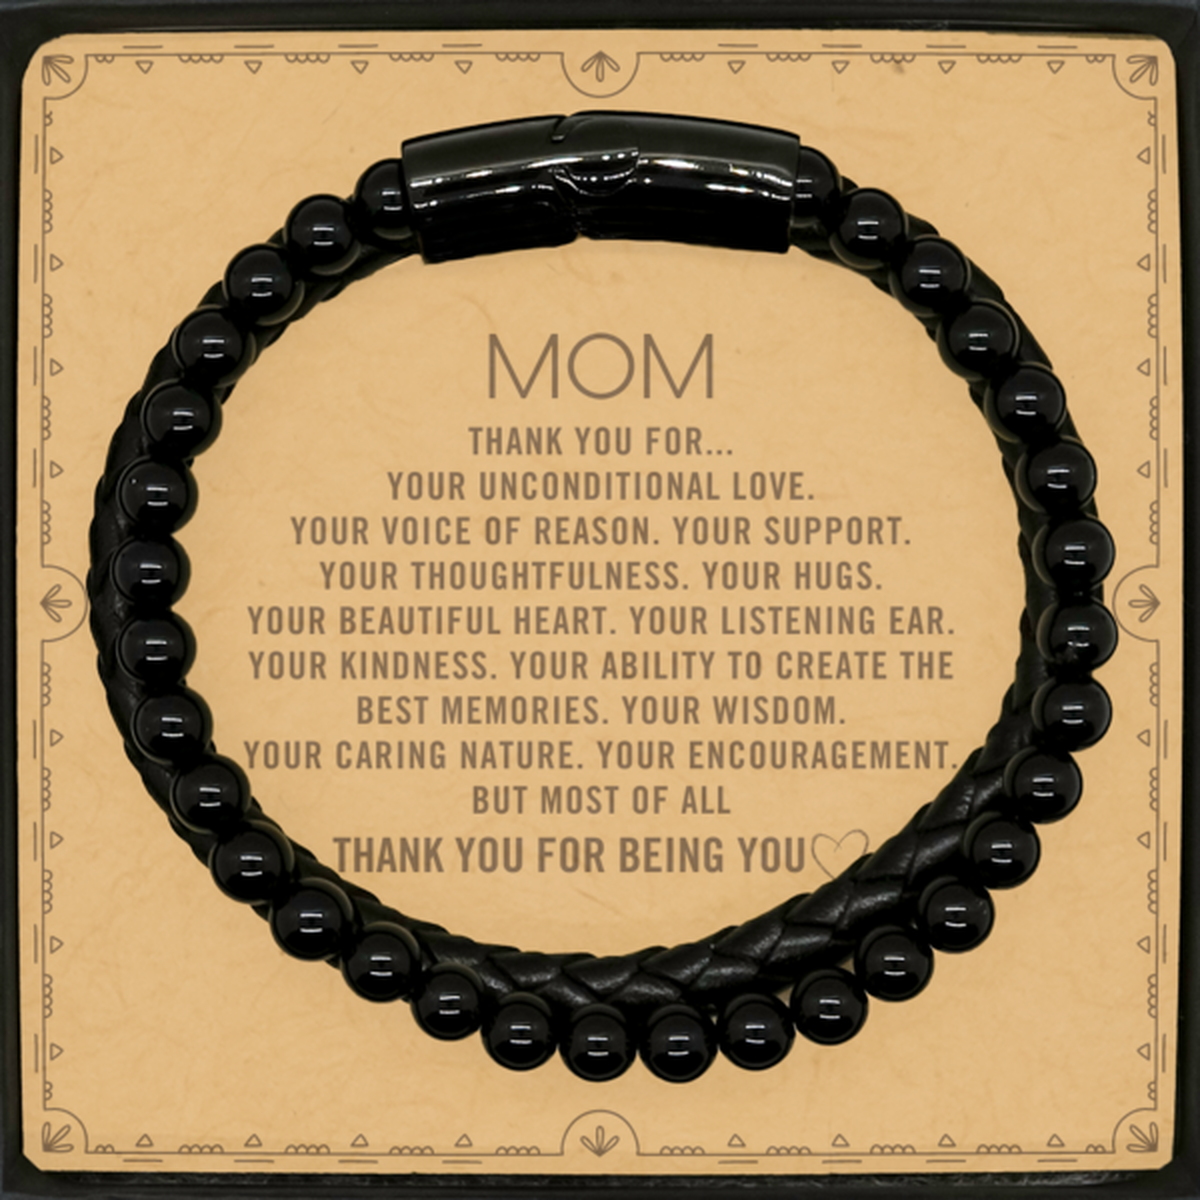 Mom Stone Leather Bracelets Custom, Message Card Gifts For Mom Christmas Graduation Birthday Gifts for Men Women Mom Thank you for Your unconditional love